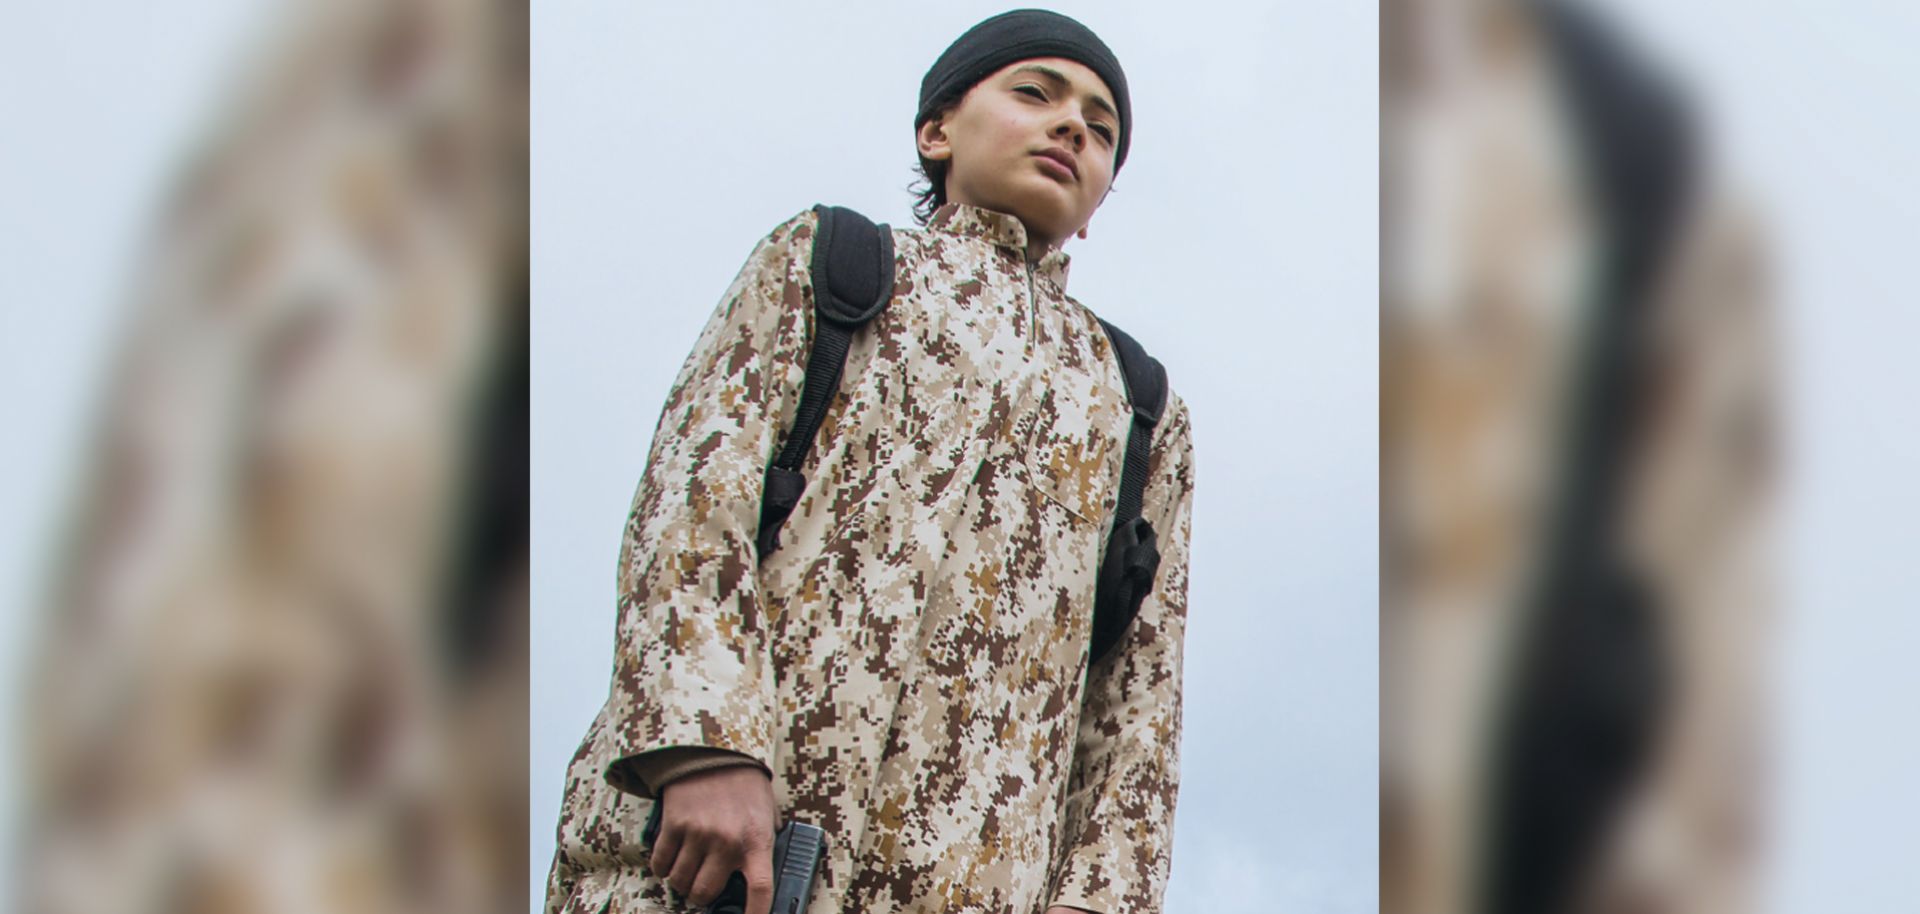 Islamic State propaganda such as Dabiq magazine often features images of children who have been radicalized by the group.